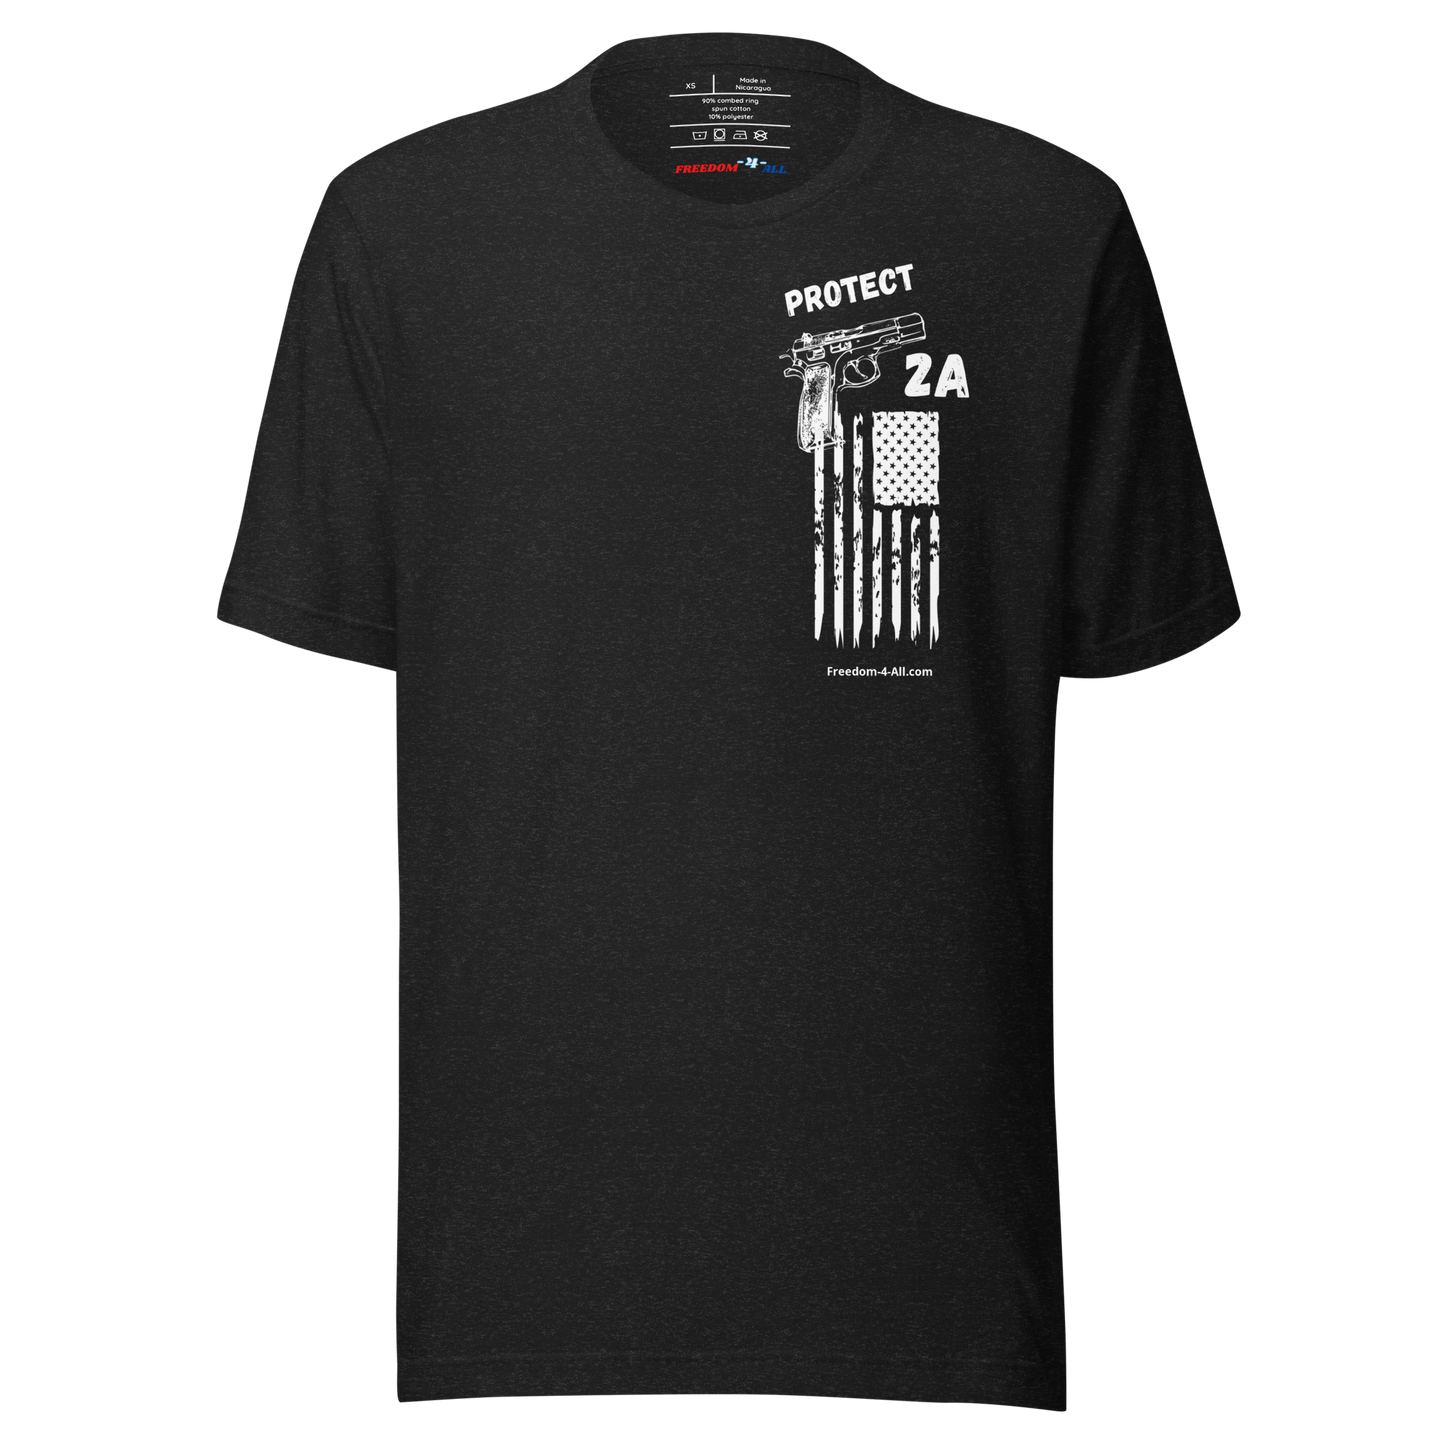 (2A-01) Protect 2A Unisex T-Shirt